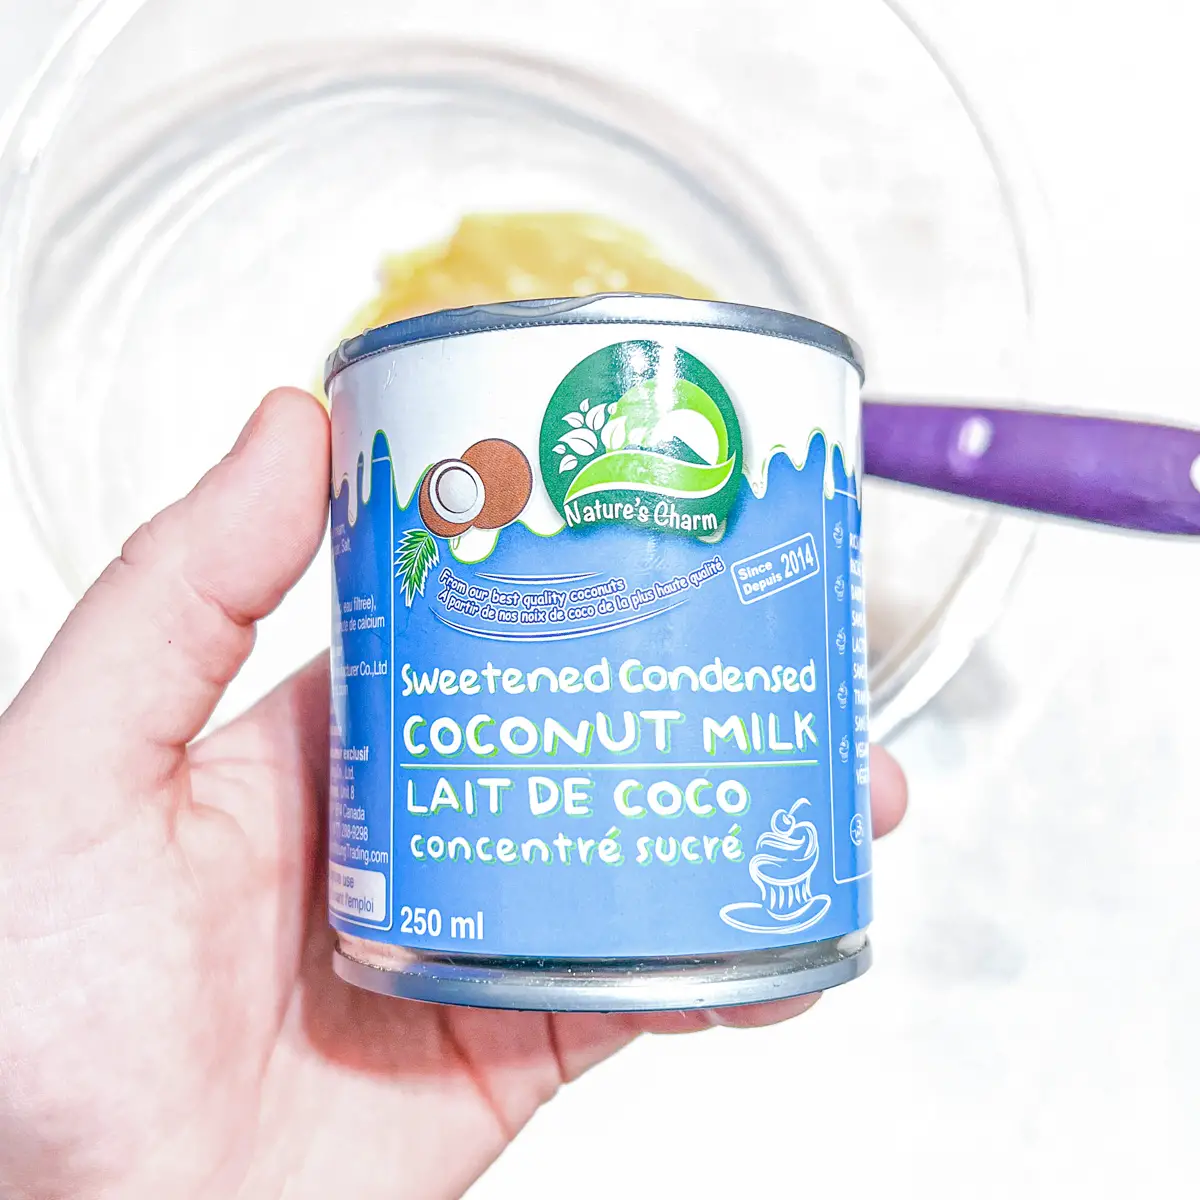 Close up of a can of vegan coconut sweetened condensed milk from Nature's Charm.